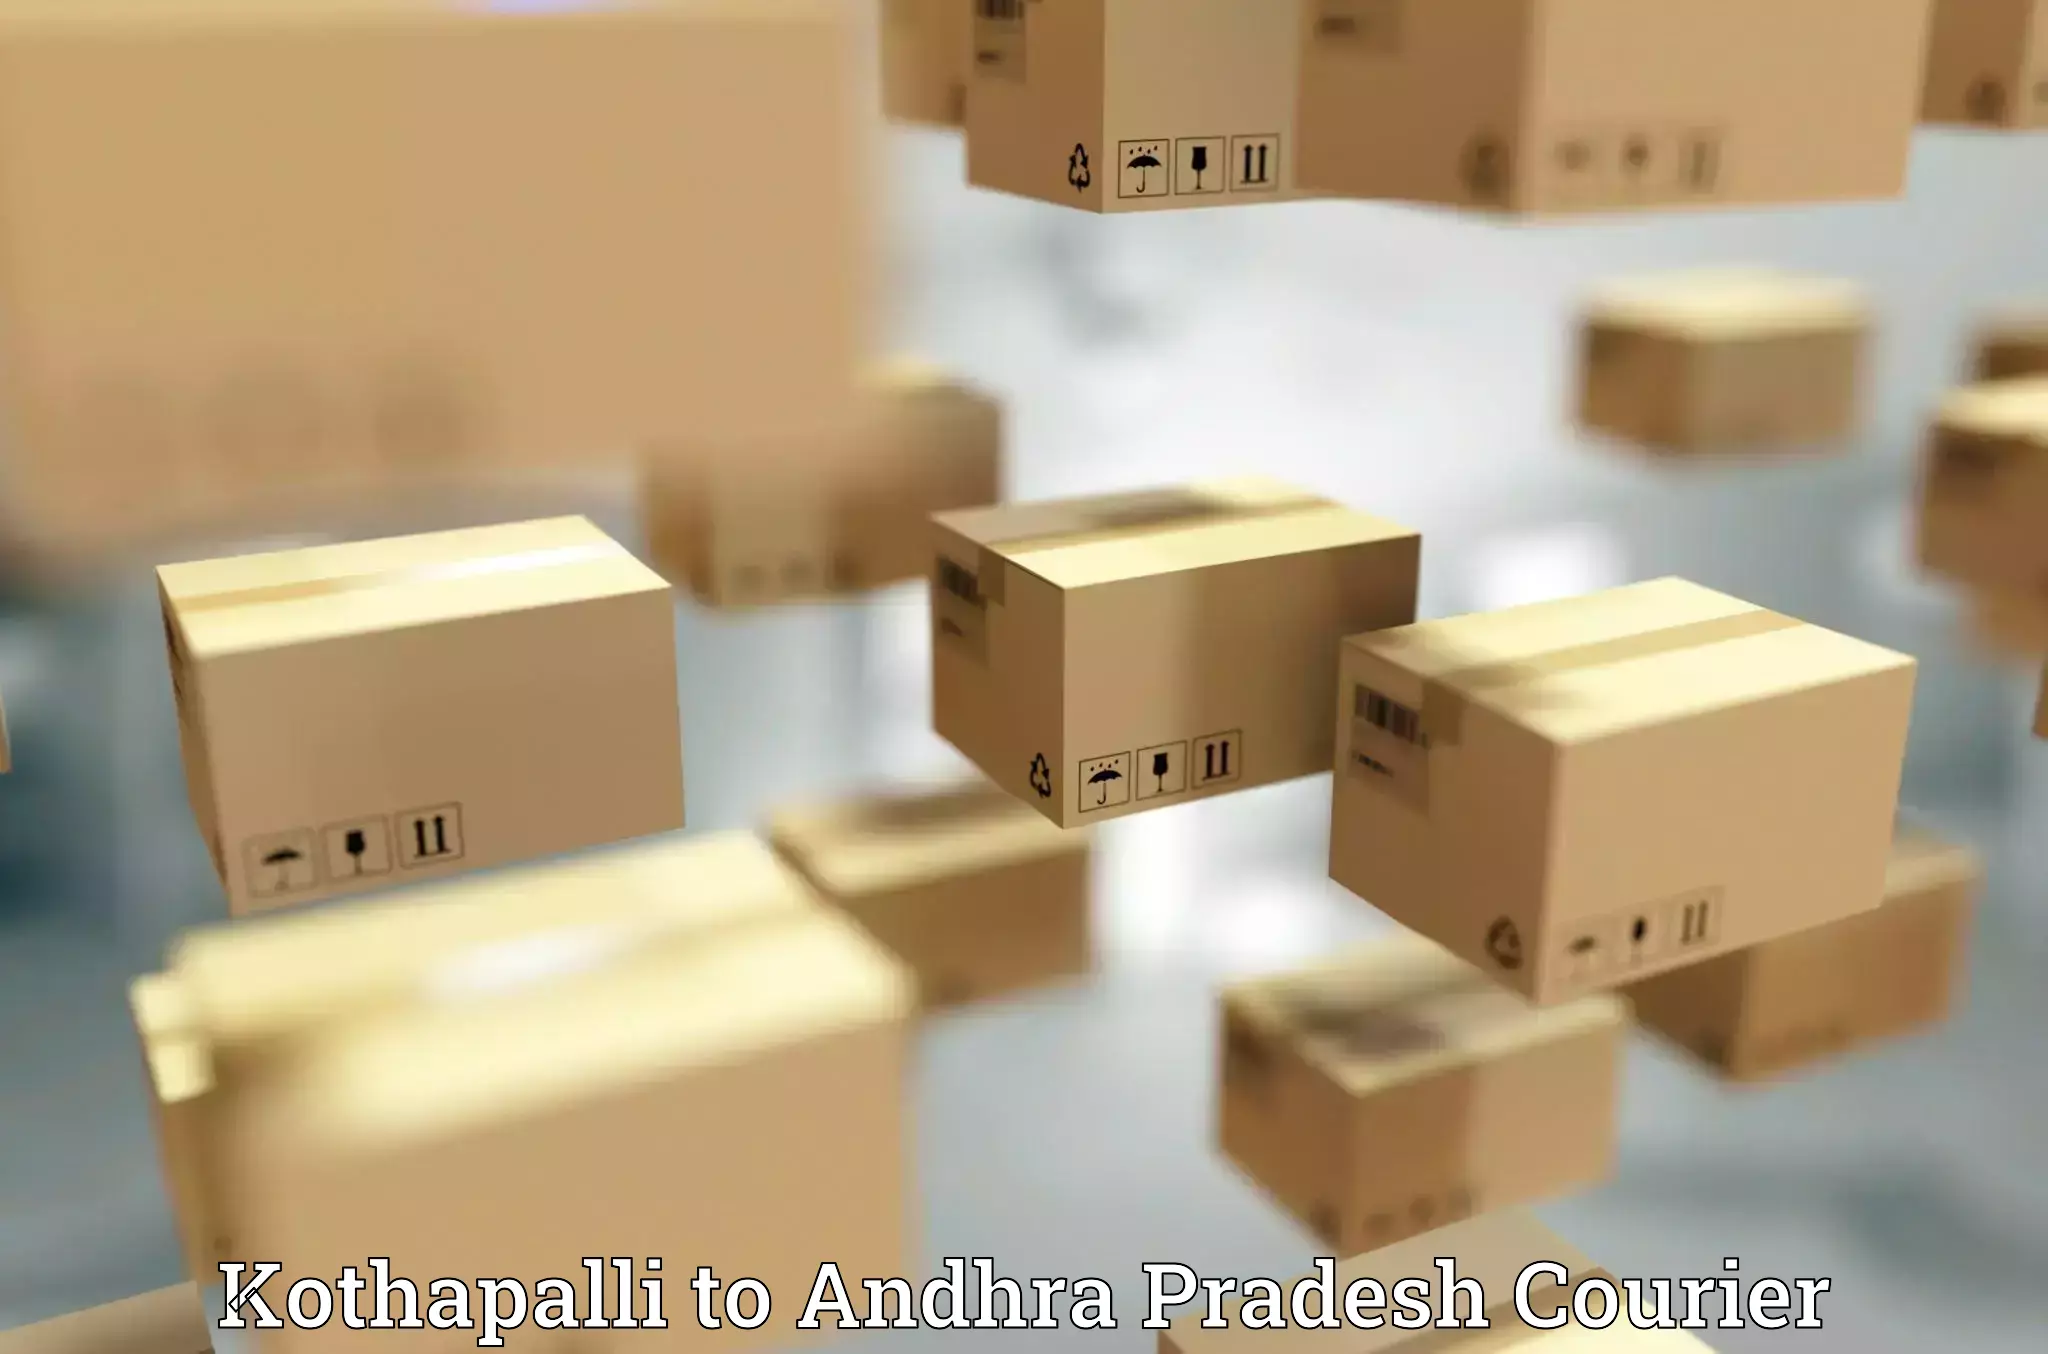 Multi-national courier services Kothapalli to Kuppam